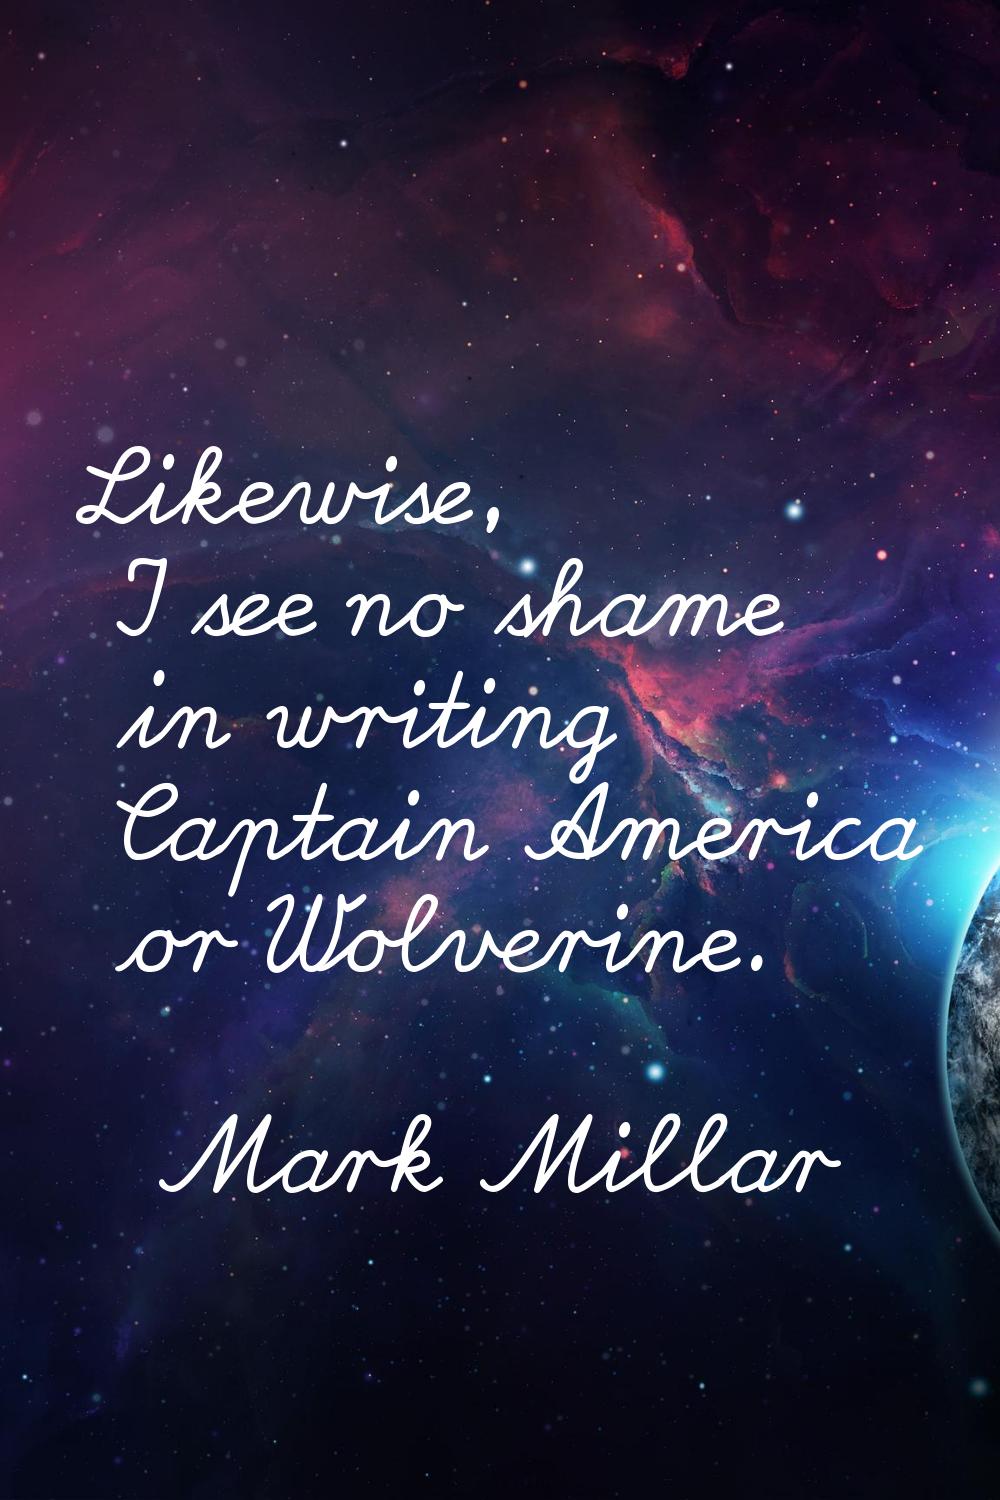 Likewise, I see no shame in writing Captain America or Wolverine.